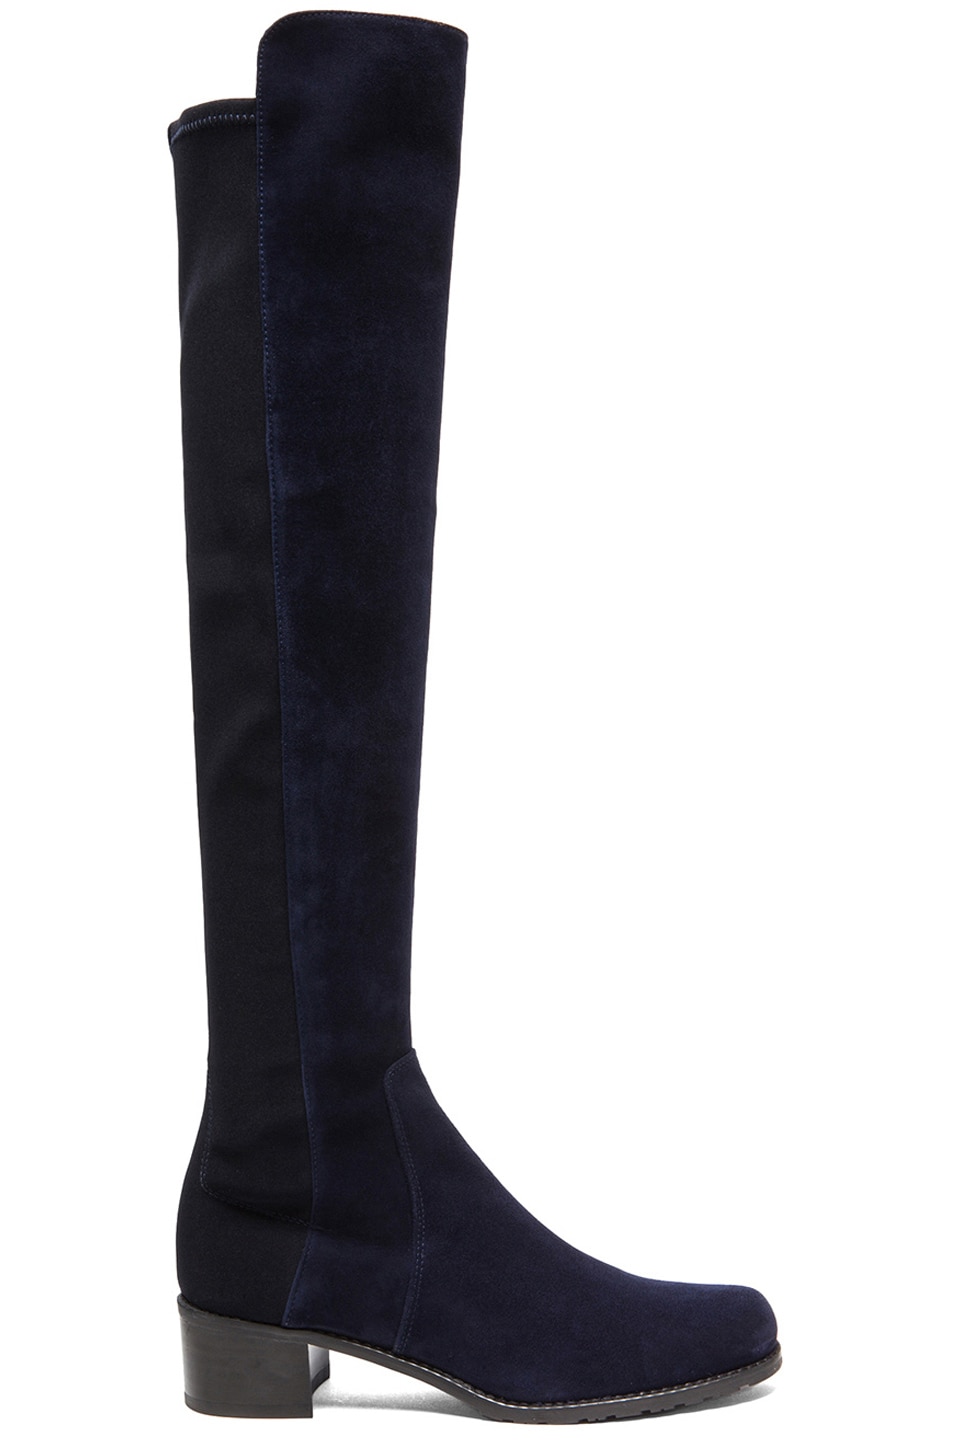 Image 1 of Stuart Weitzman Reserve Stretch Suede & Neoprene Boots in Nice Blue